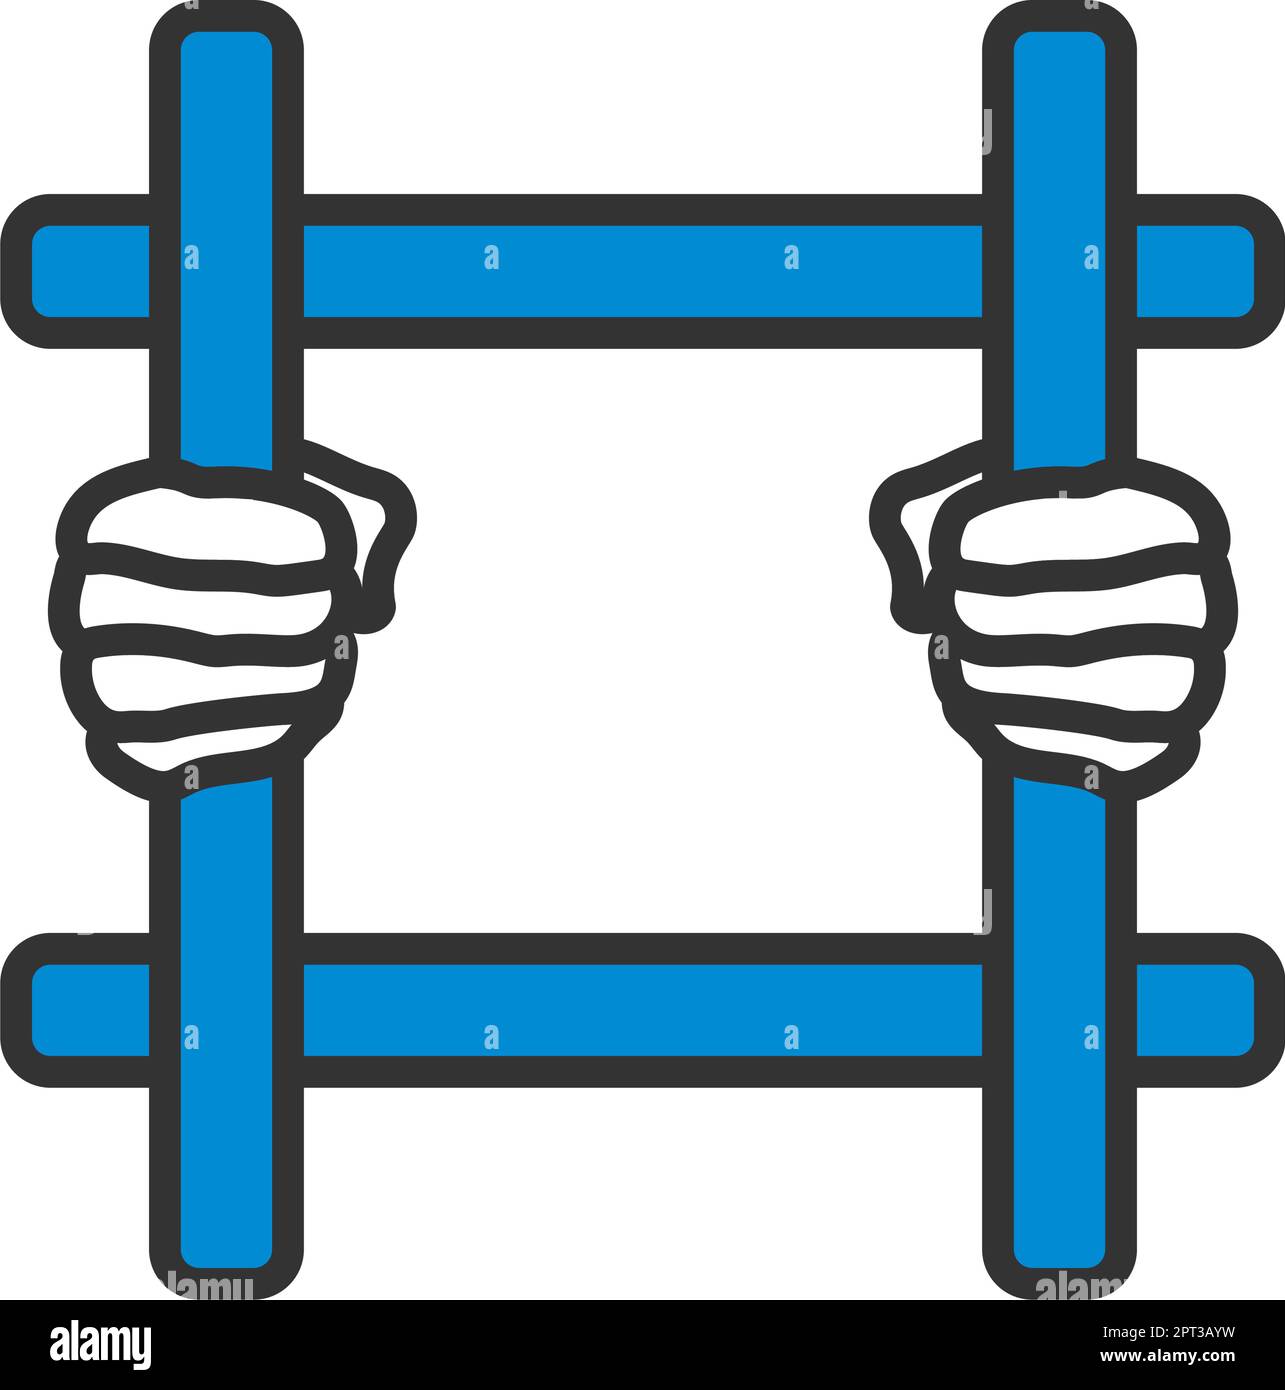 Hands Holding Prison Bars Icon Stock Vector